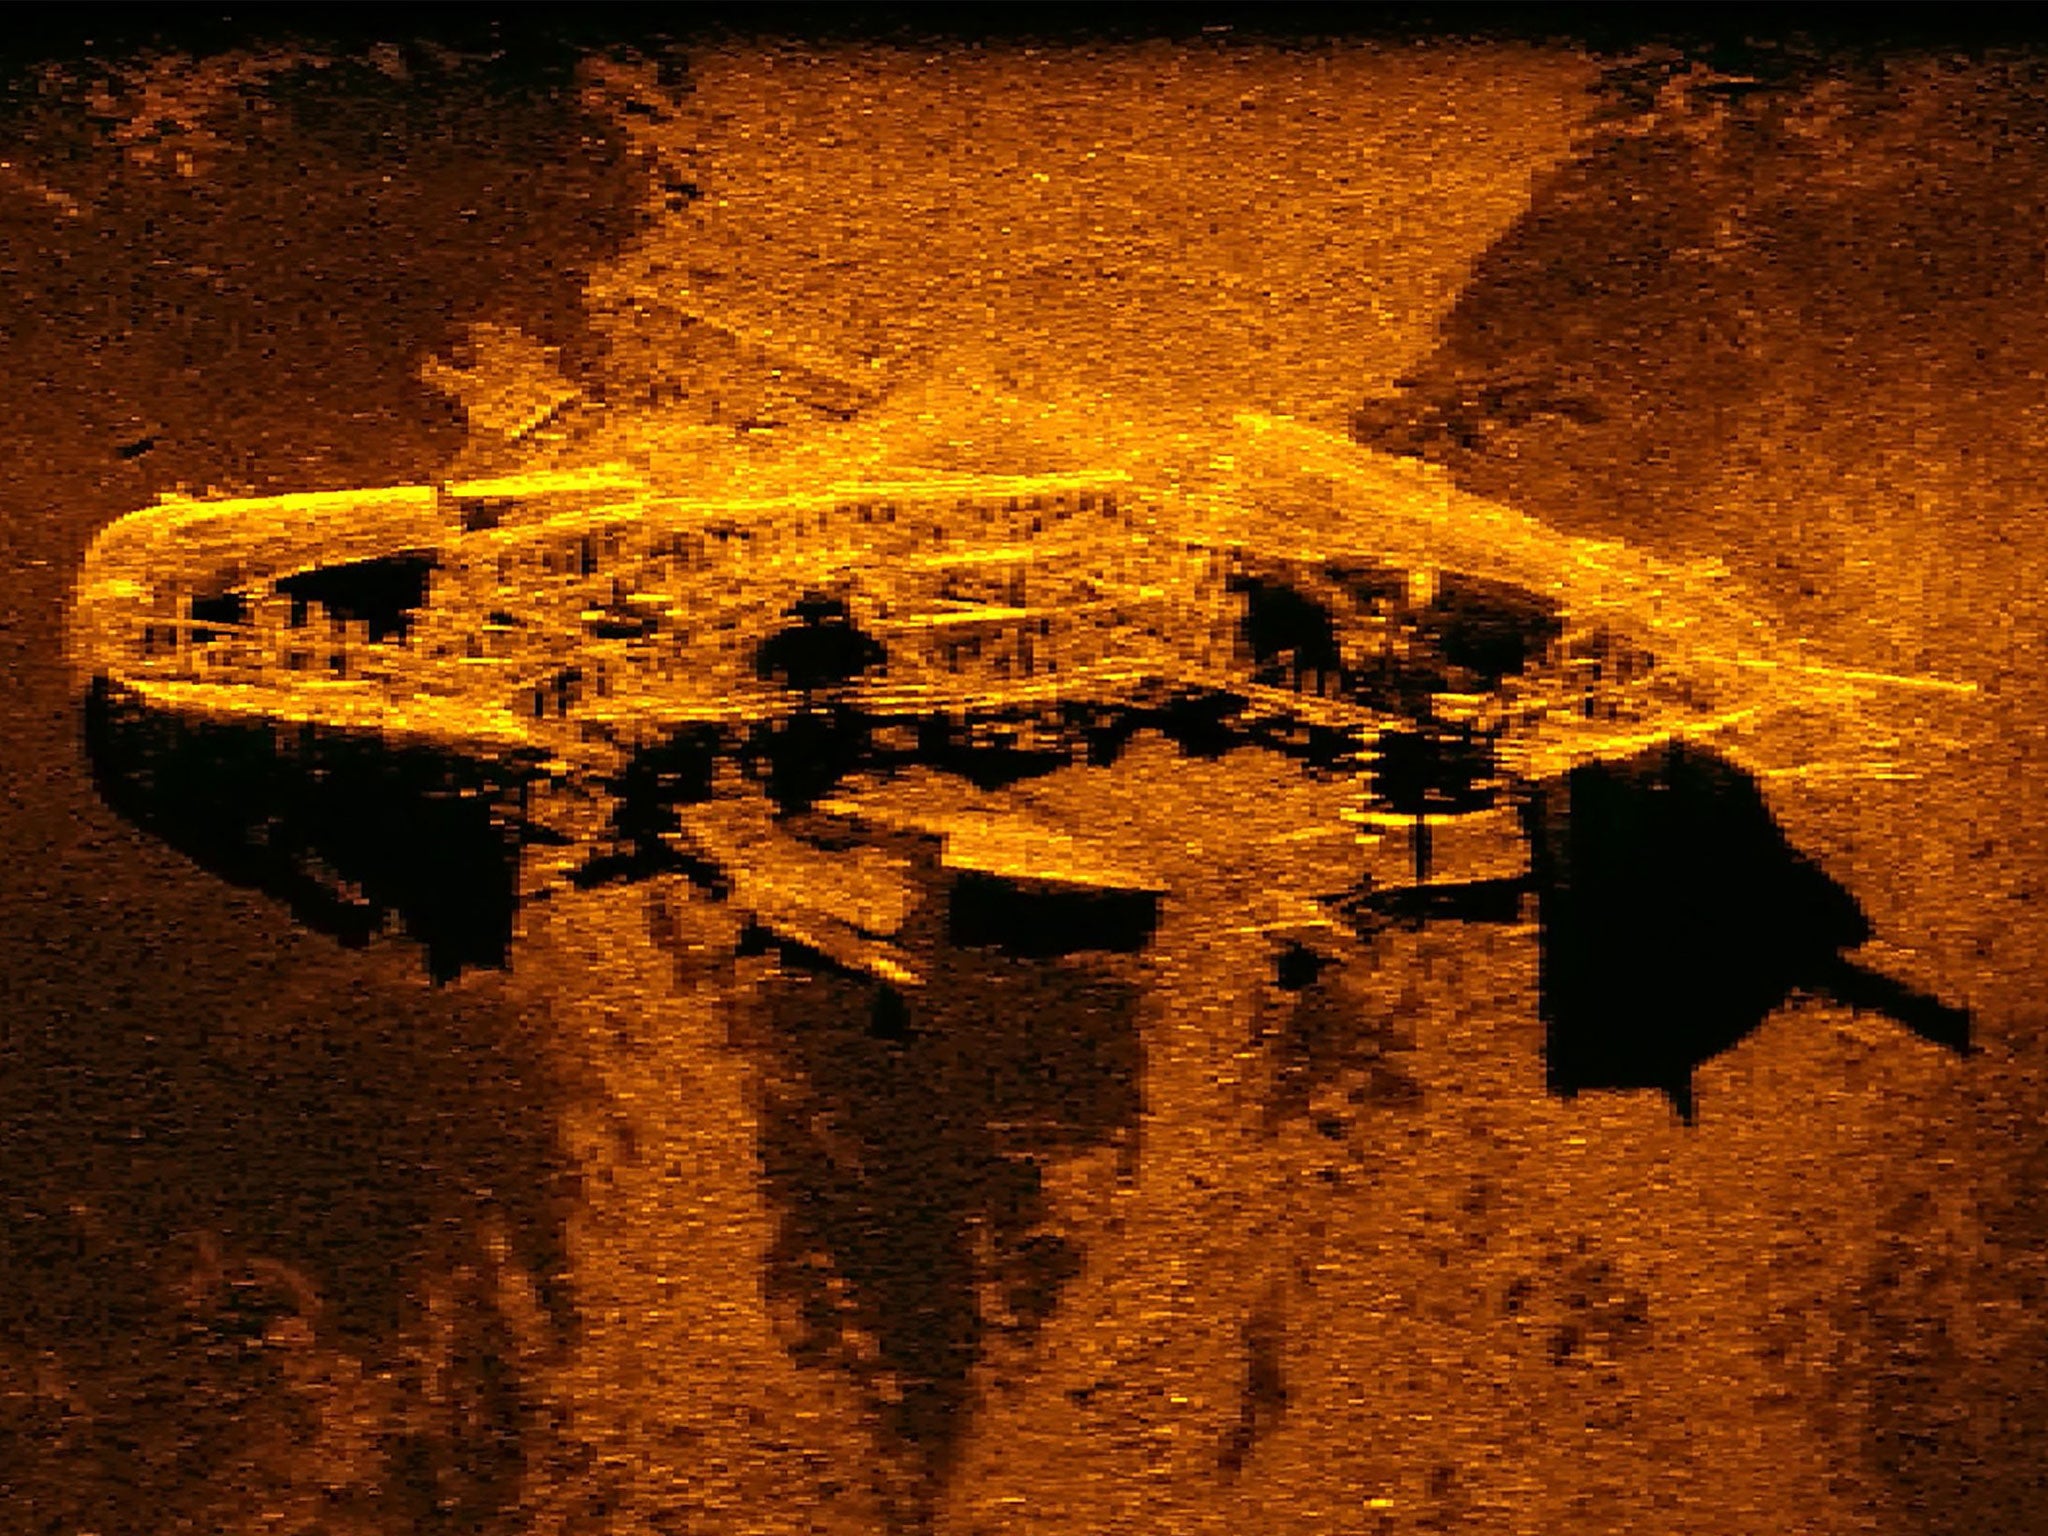 A sonar image of one of the shipwrecks discovered during the MH370 search